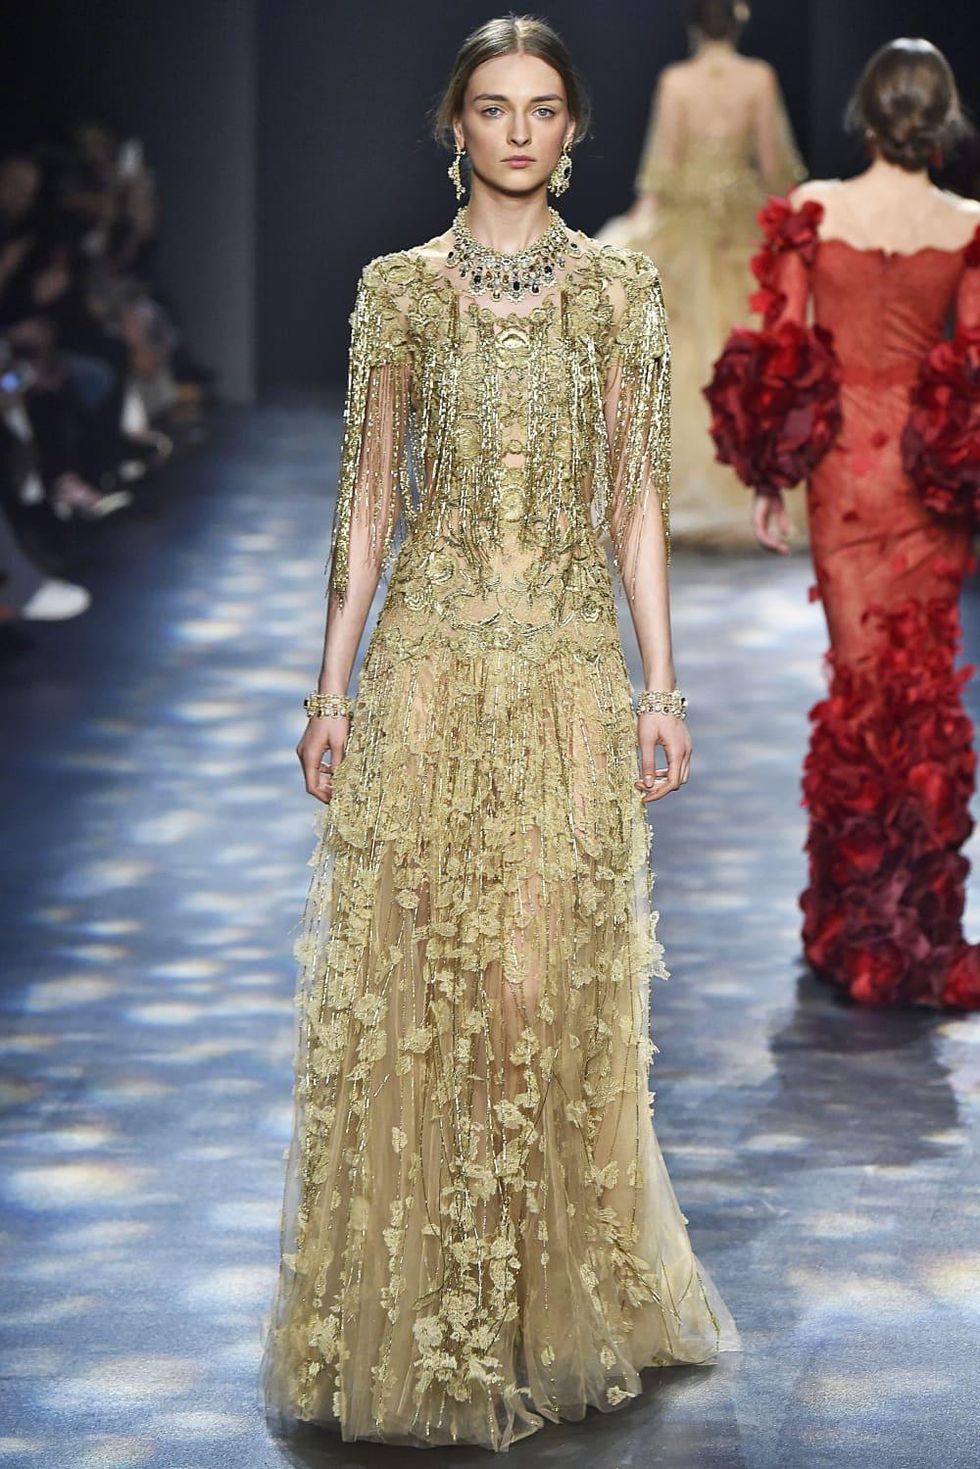 Magnificent Marchesa collection features evening gowns fit for a queen ...